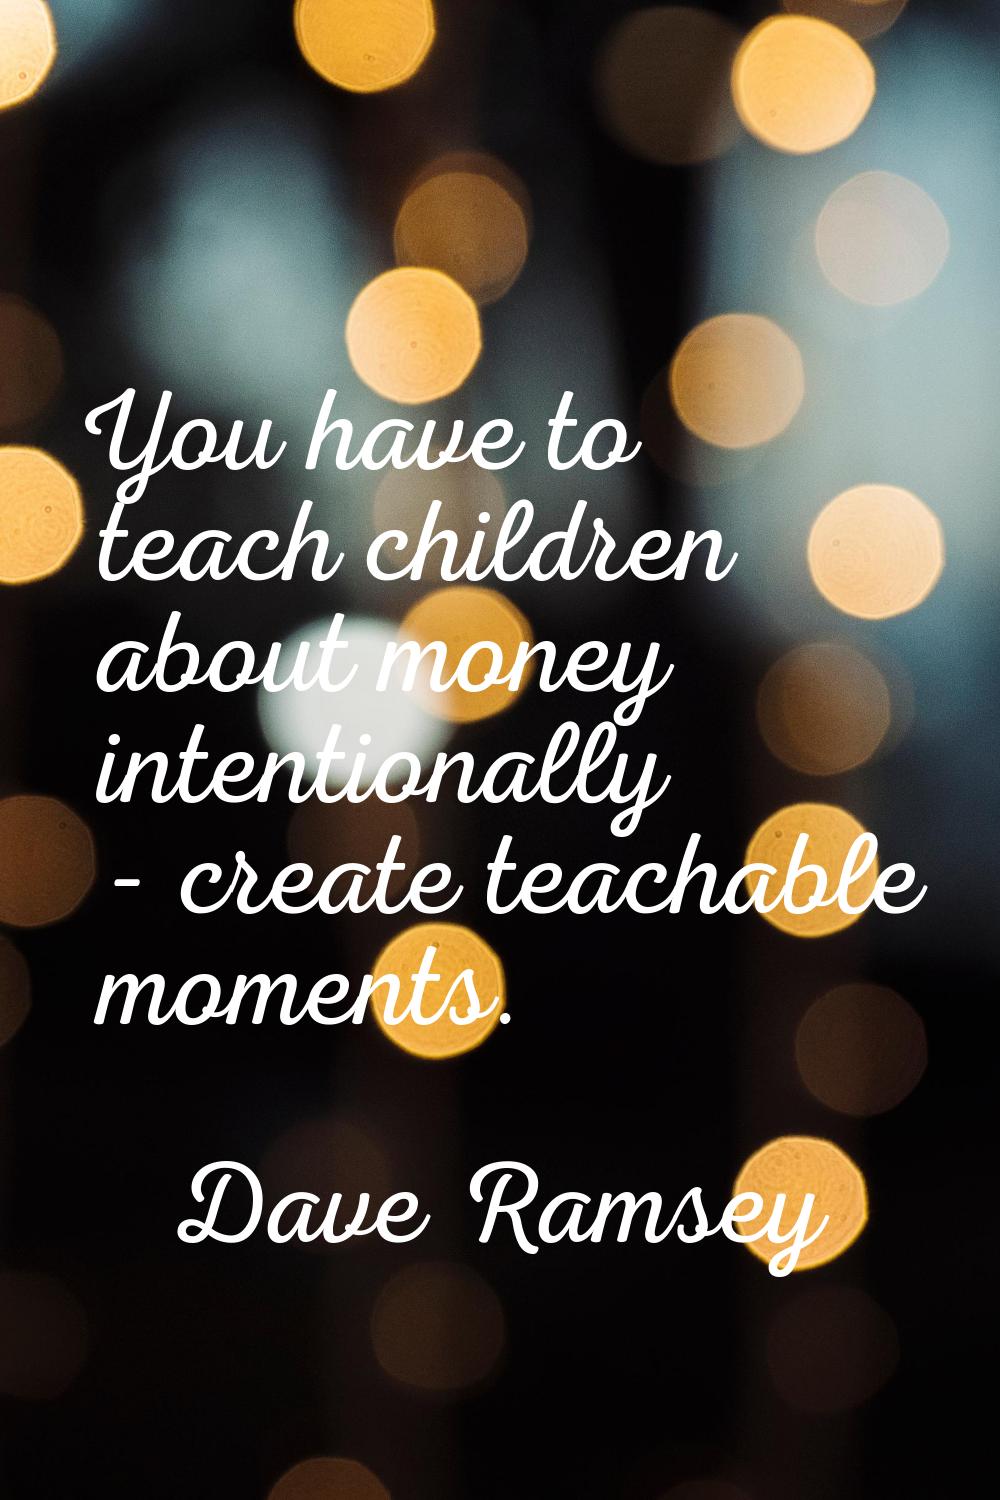 You have to teach children about money intentionally - create teachable moments.